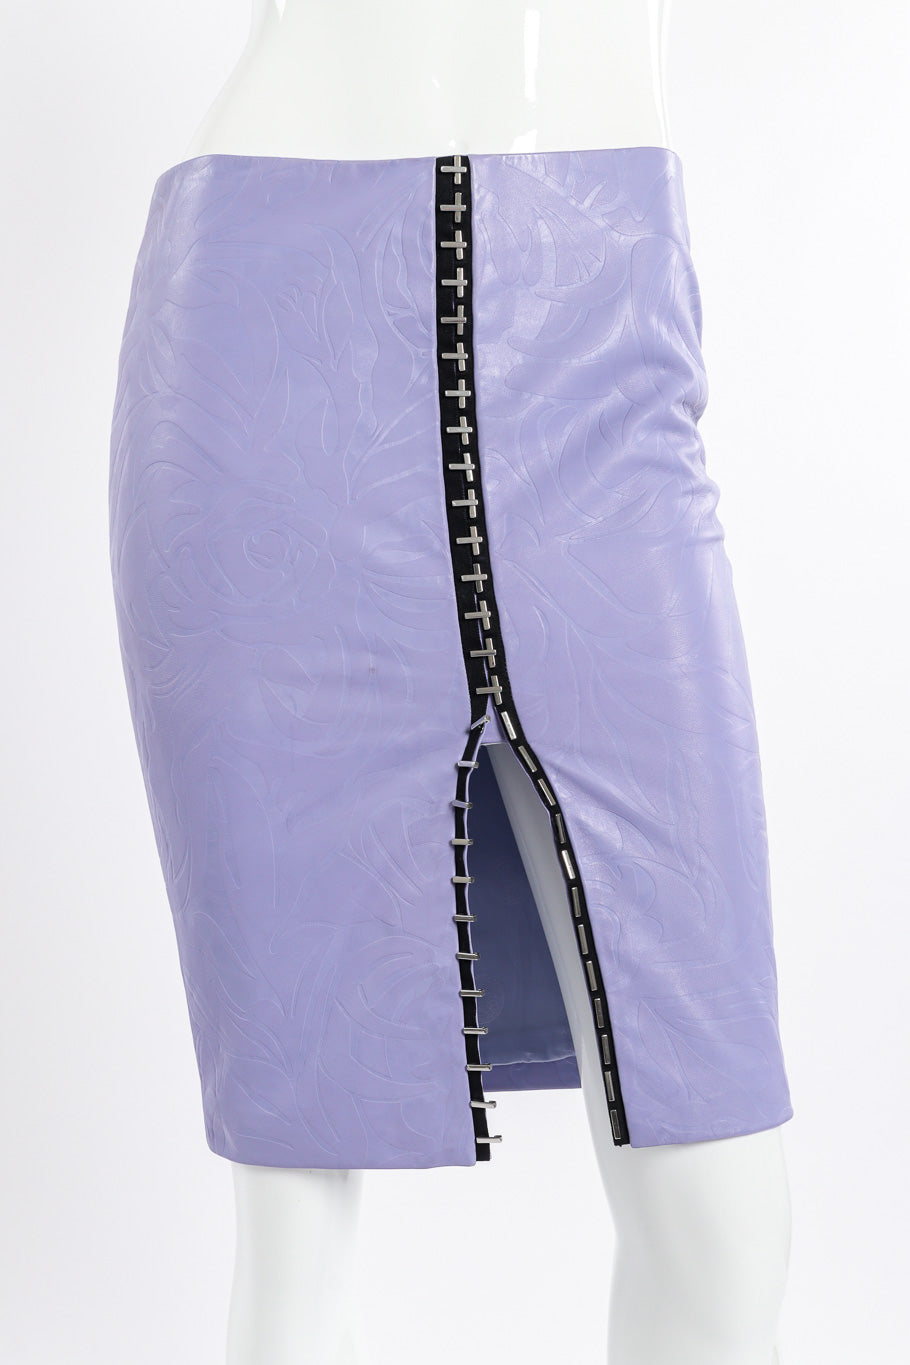 Versace Embossed Leather Pencil Skirt front view on mannequin closeup @Recessla